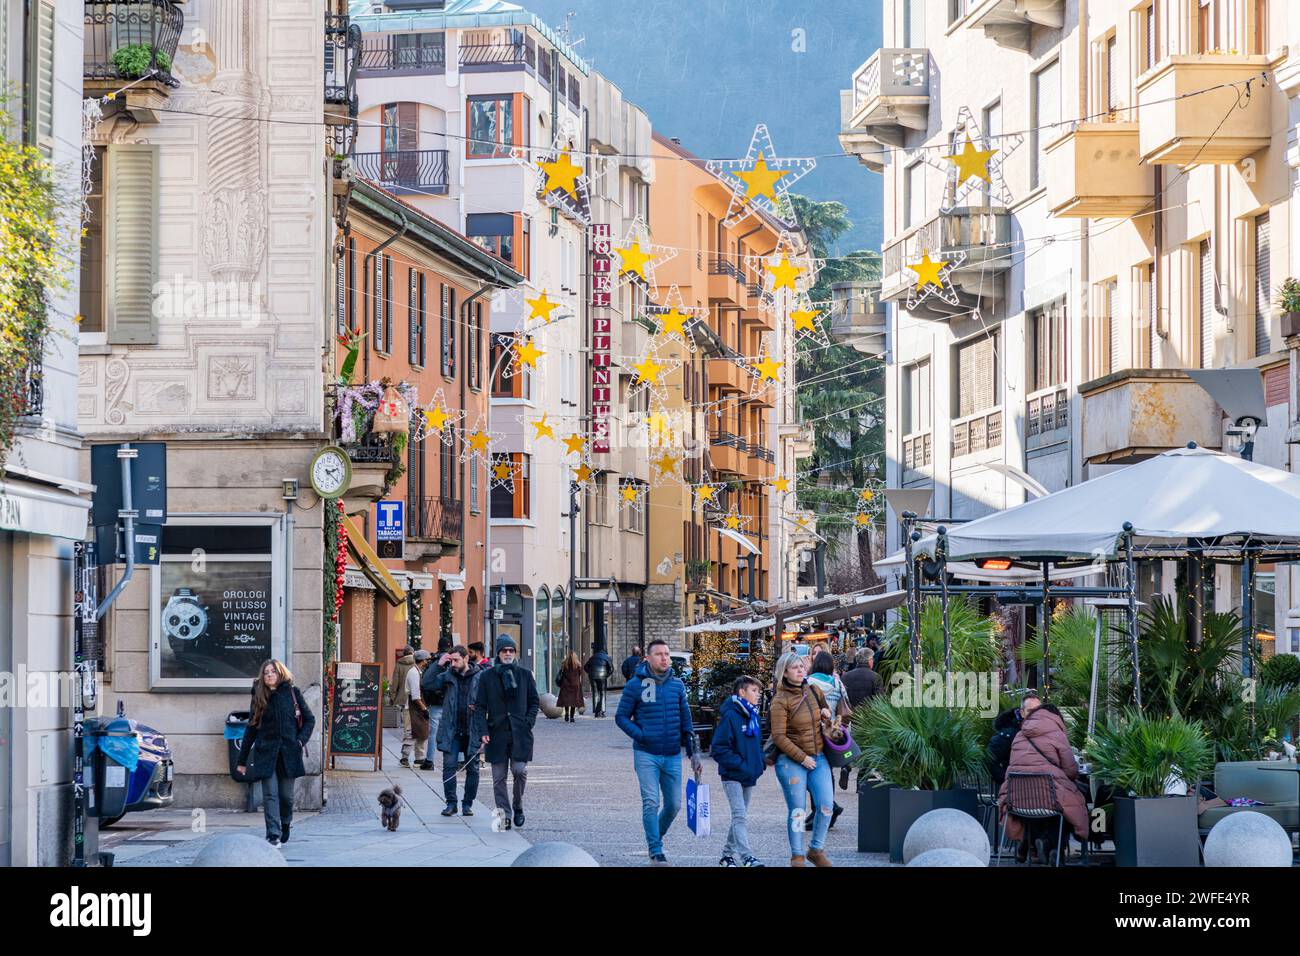 People / Tourists walking through a street in the city of Como, Italy Stock Photo